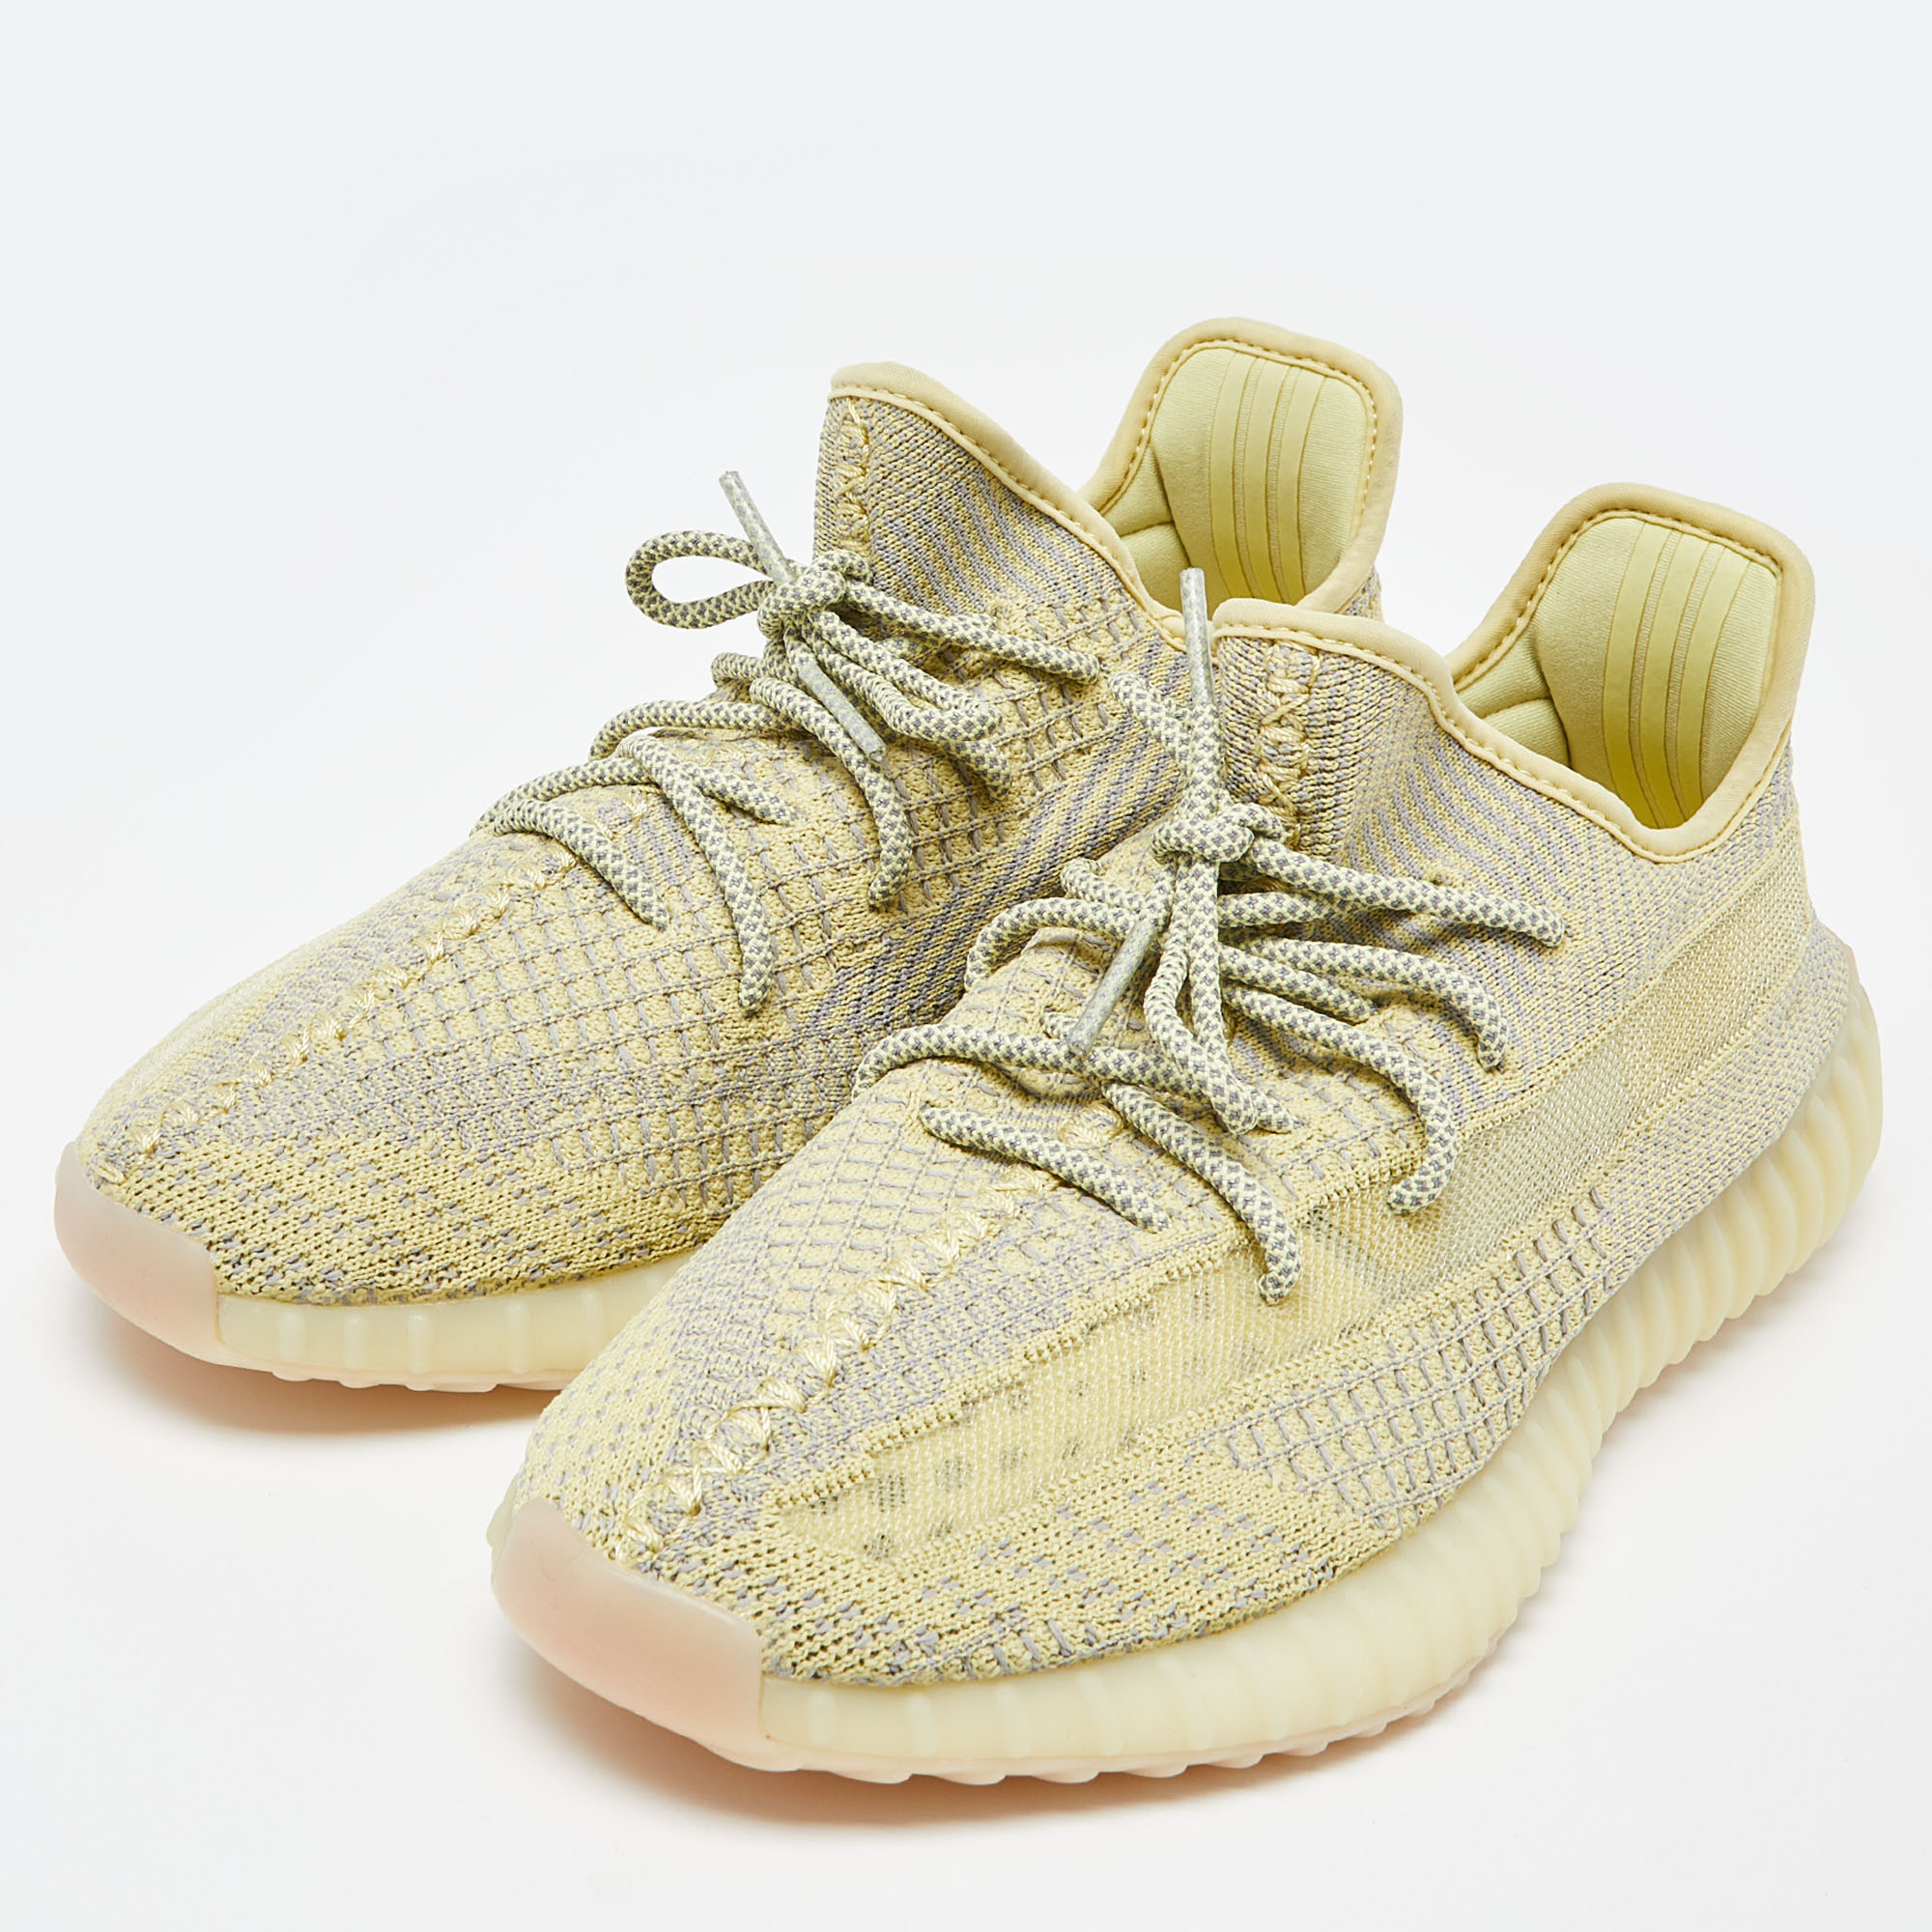 

Yeezy x Adidas Yellow/Grey Knit Fabric Boost 350 V2 Antlia Non-Reflective Sneakers Size  1/3